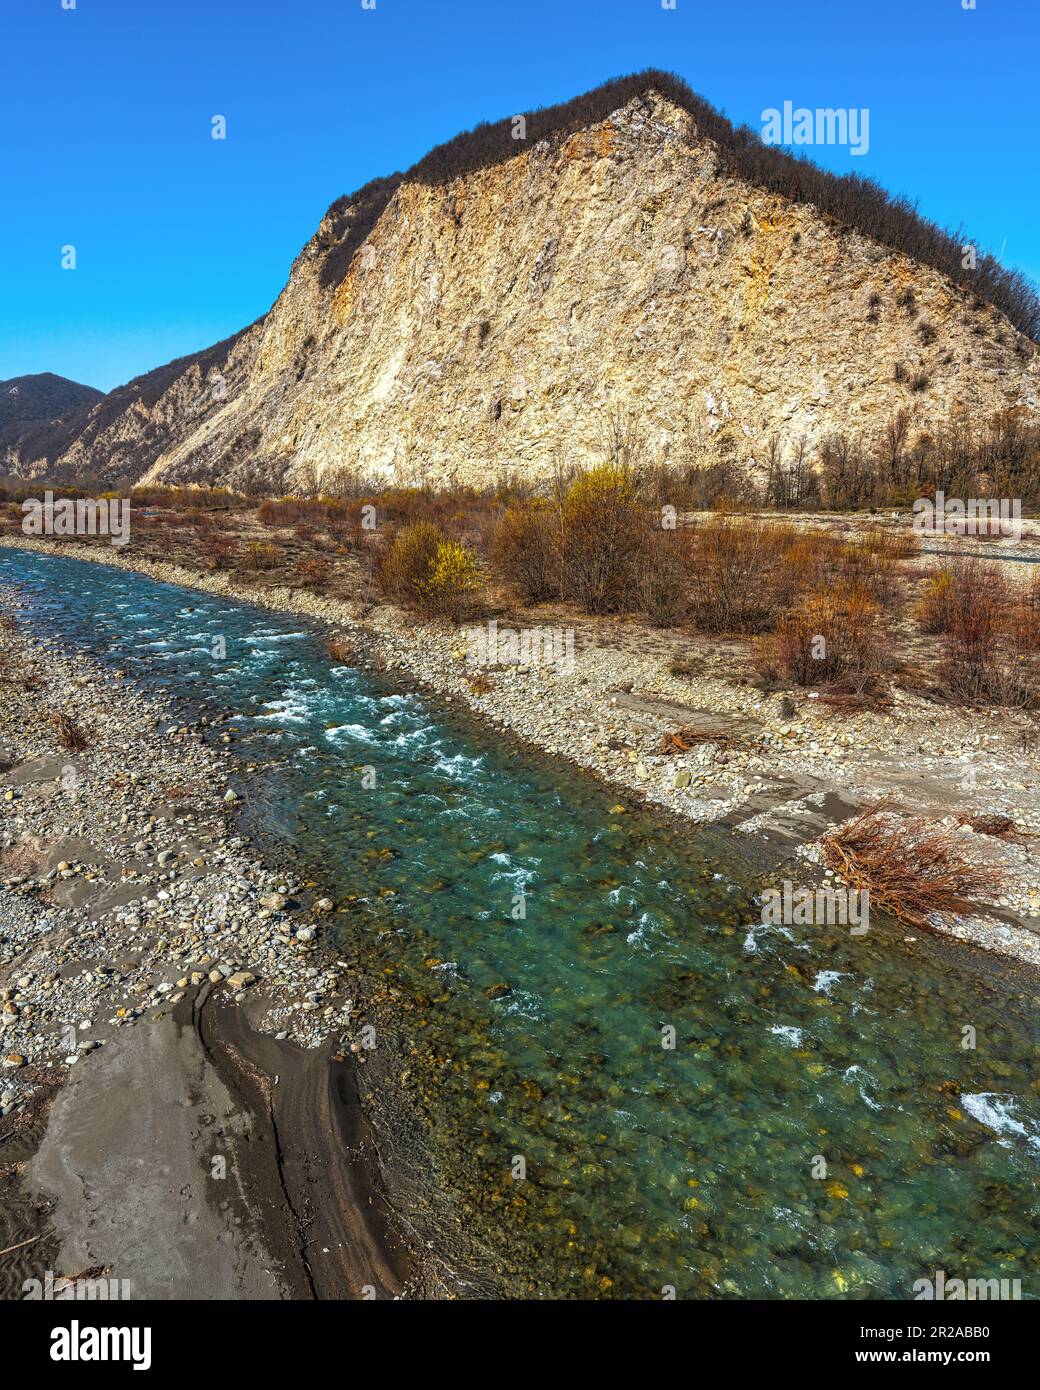 The Triassic Gypsum area extends along the upper valley of the Secchia river. Site of community interest National Park of the Tuscan-Emilian Apennines Stock Photo